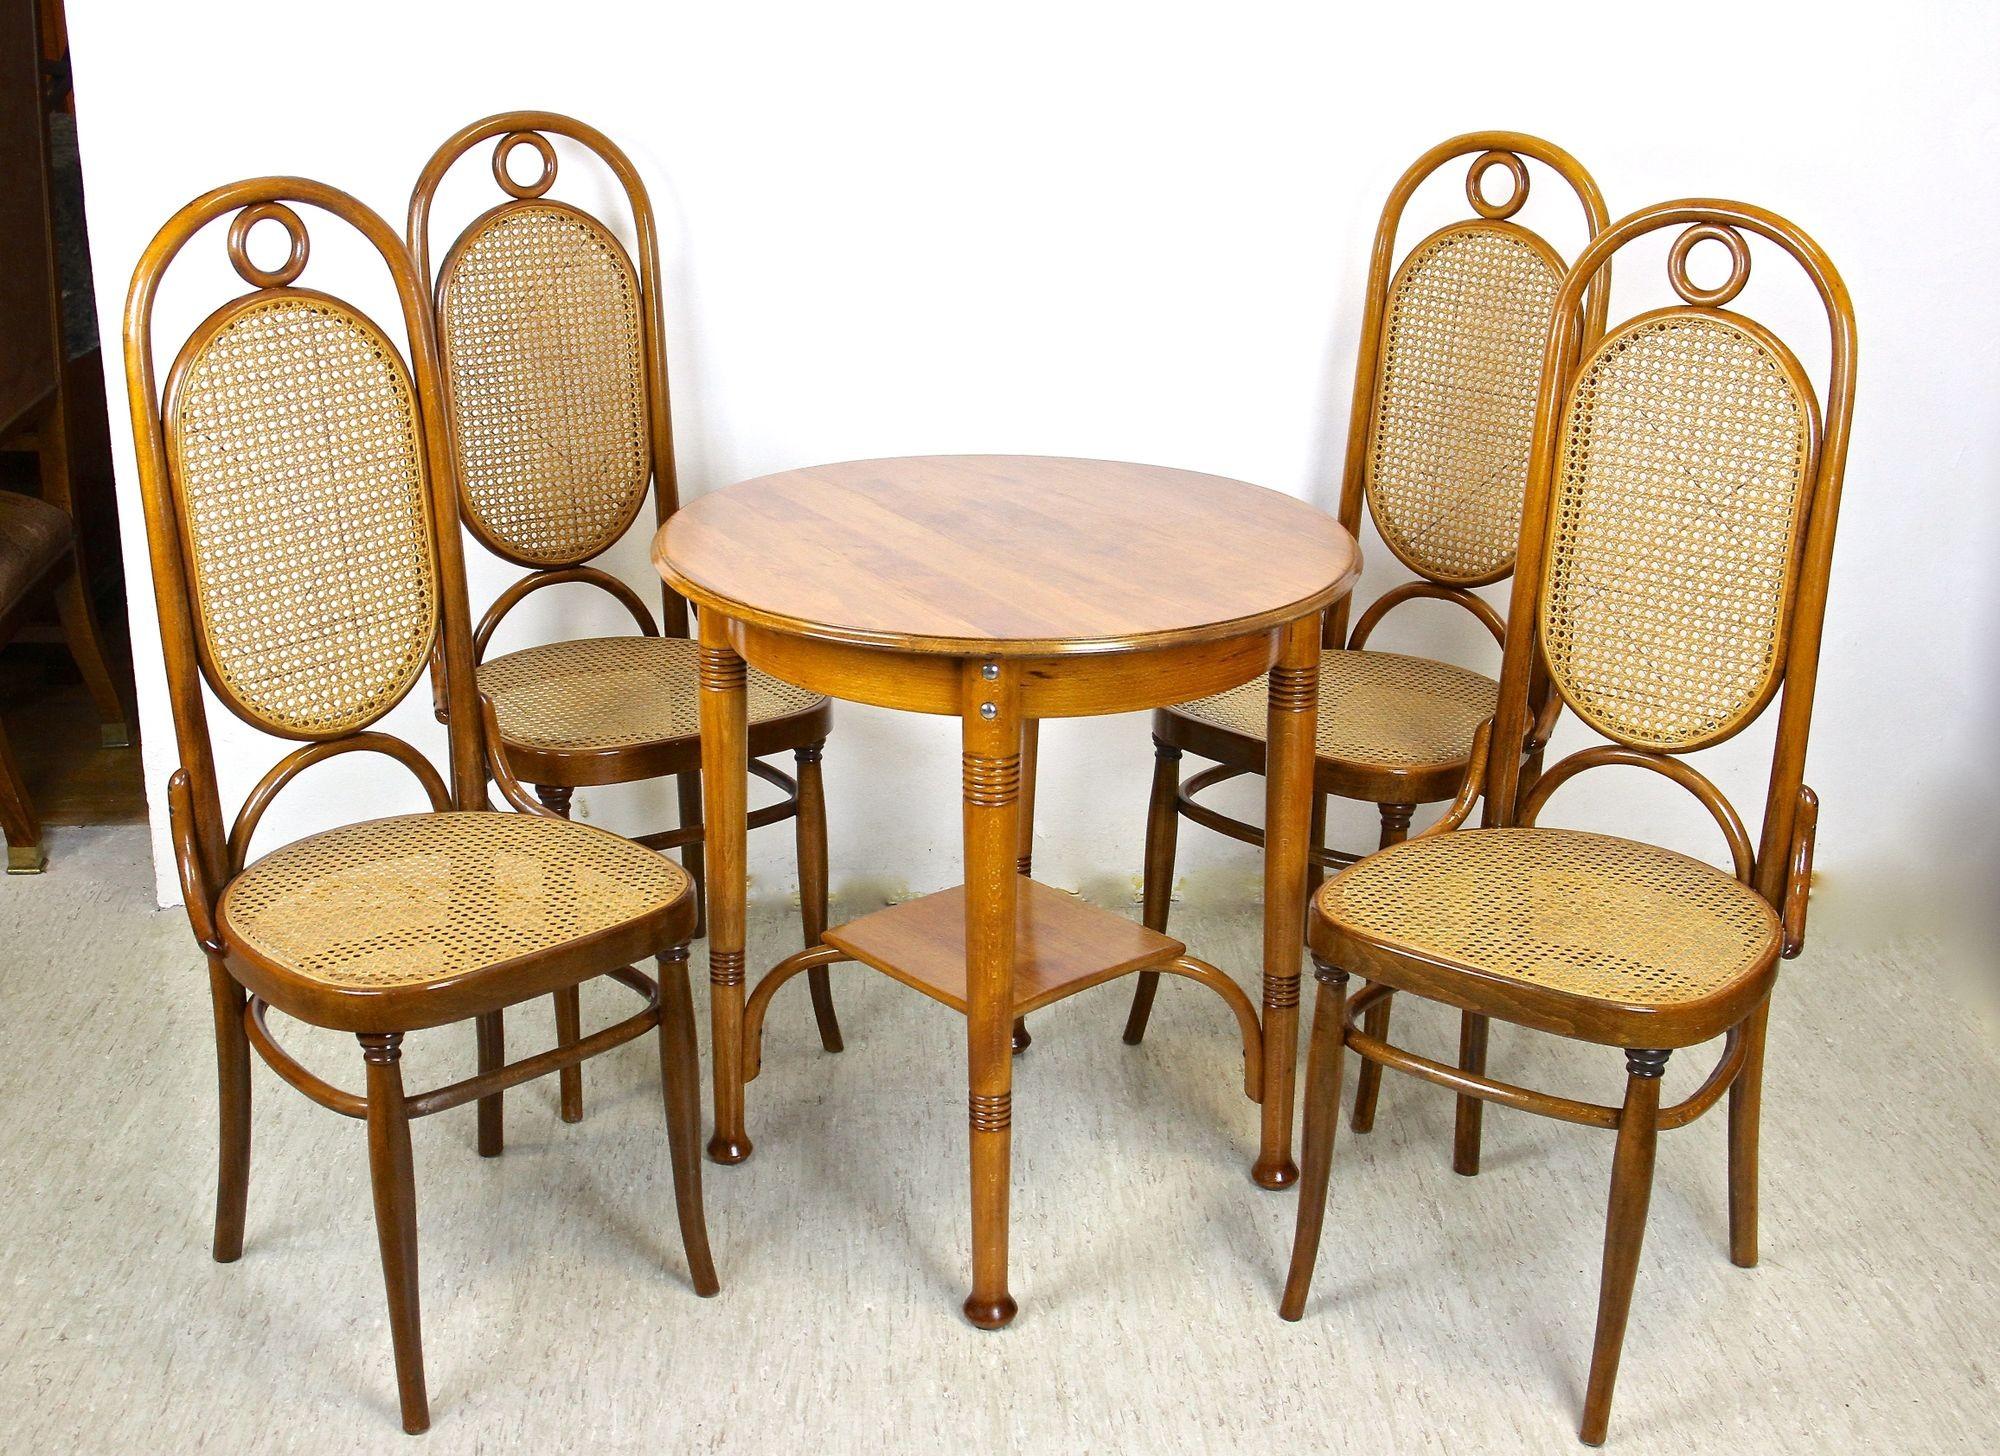 Thonet Bentwood Chairs with Table, Art Nouveau Seating Set, Austria, circa 1915 For Sale 2